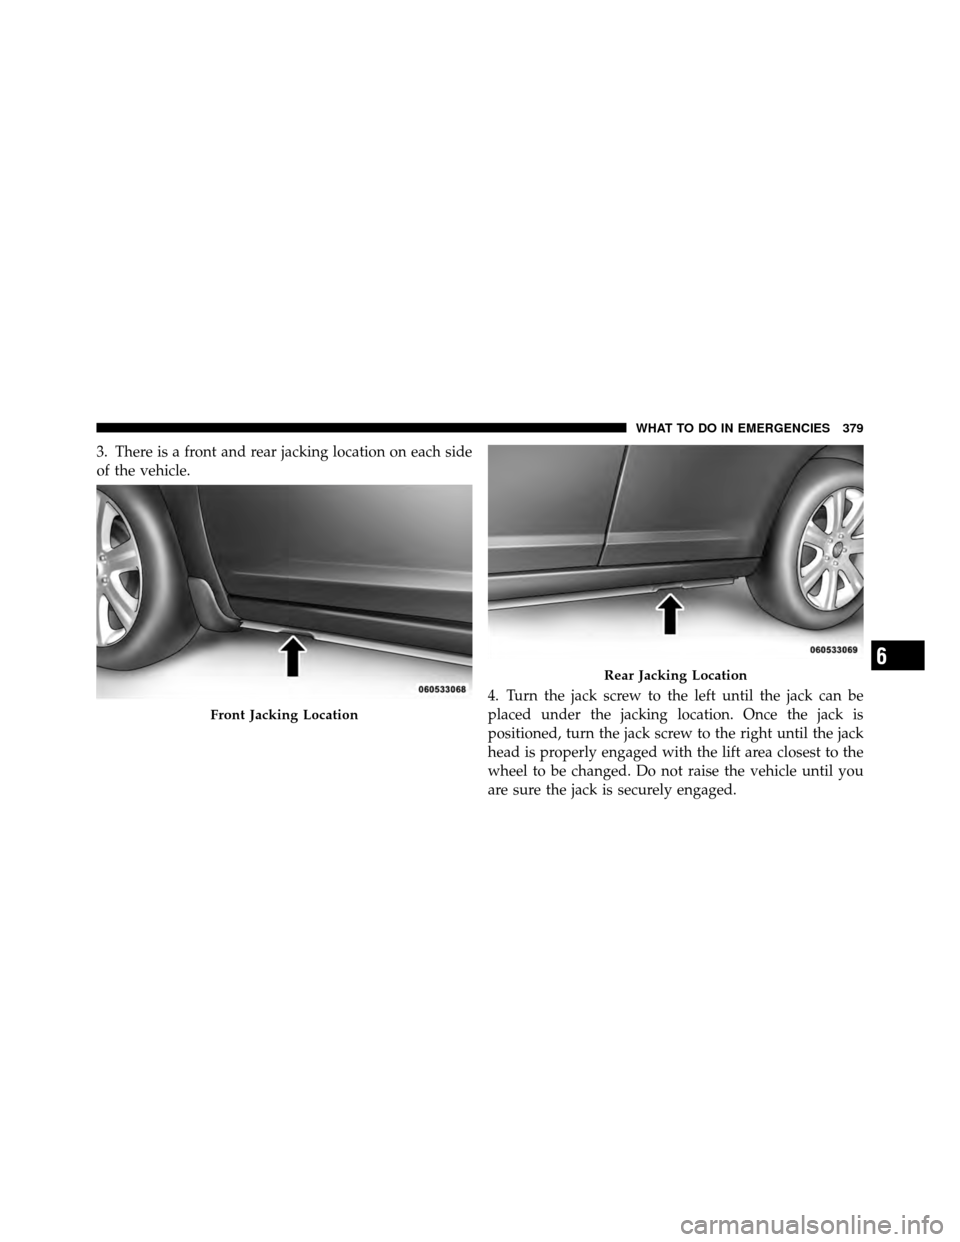 CHRYSLER 200 2011 1.G Owners Manual 3. There is a front and rear jacking location on each side
of the vehicle.4. Turn the jack screw to the left until the jack can be
placed under the jacking location. Once the jack is
positioned, turn 